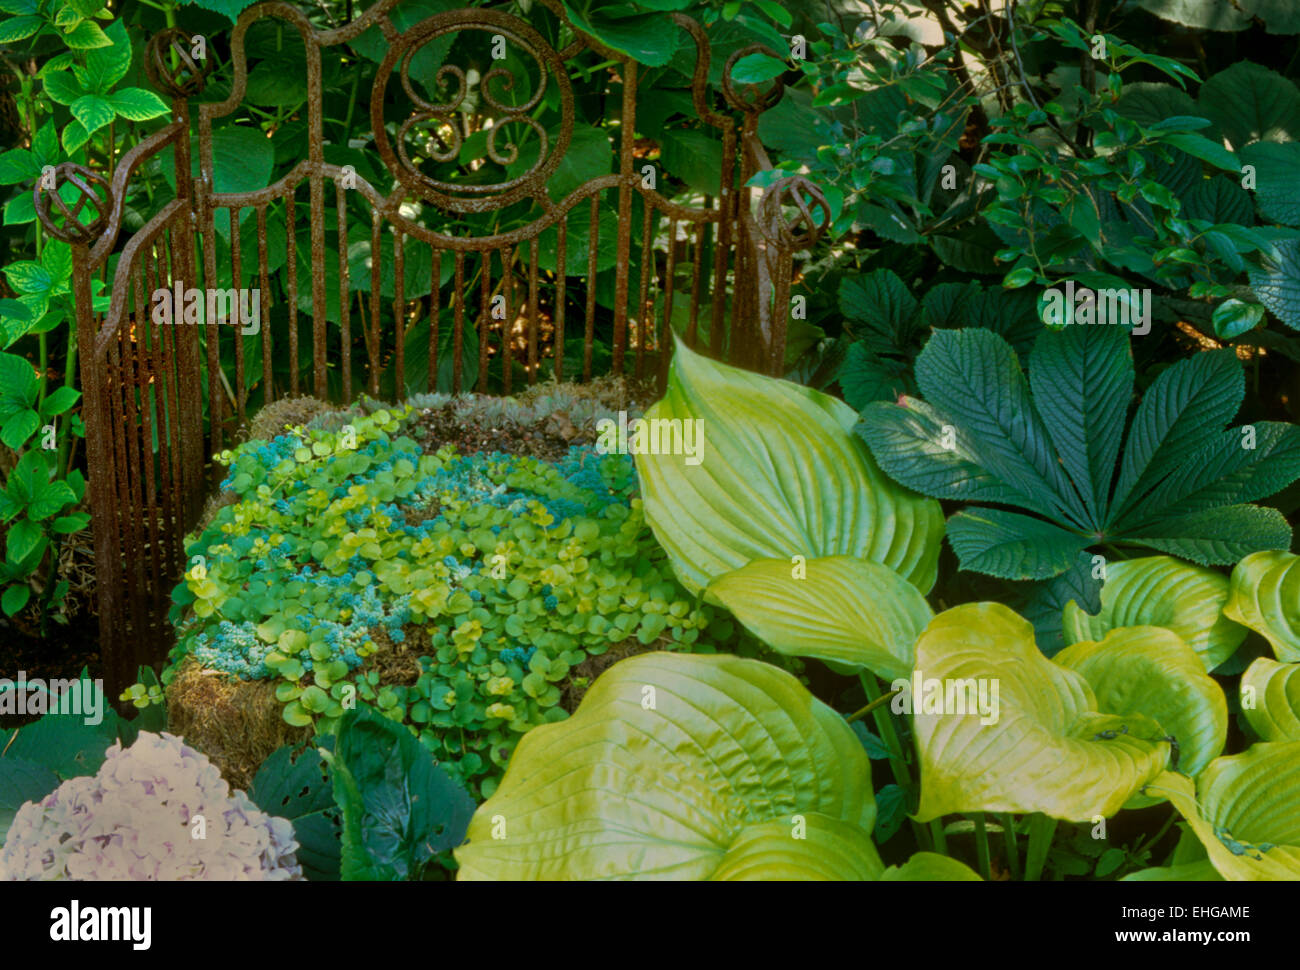 Steel Grate with Lysimachia , Hosta, and Rodgersia in Shade Garden Stock Photo